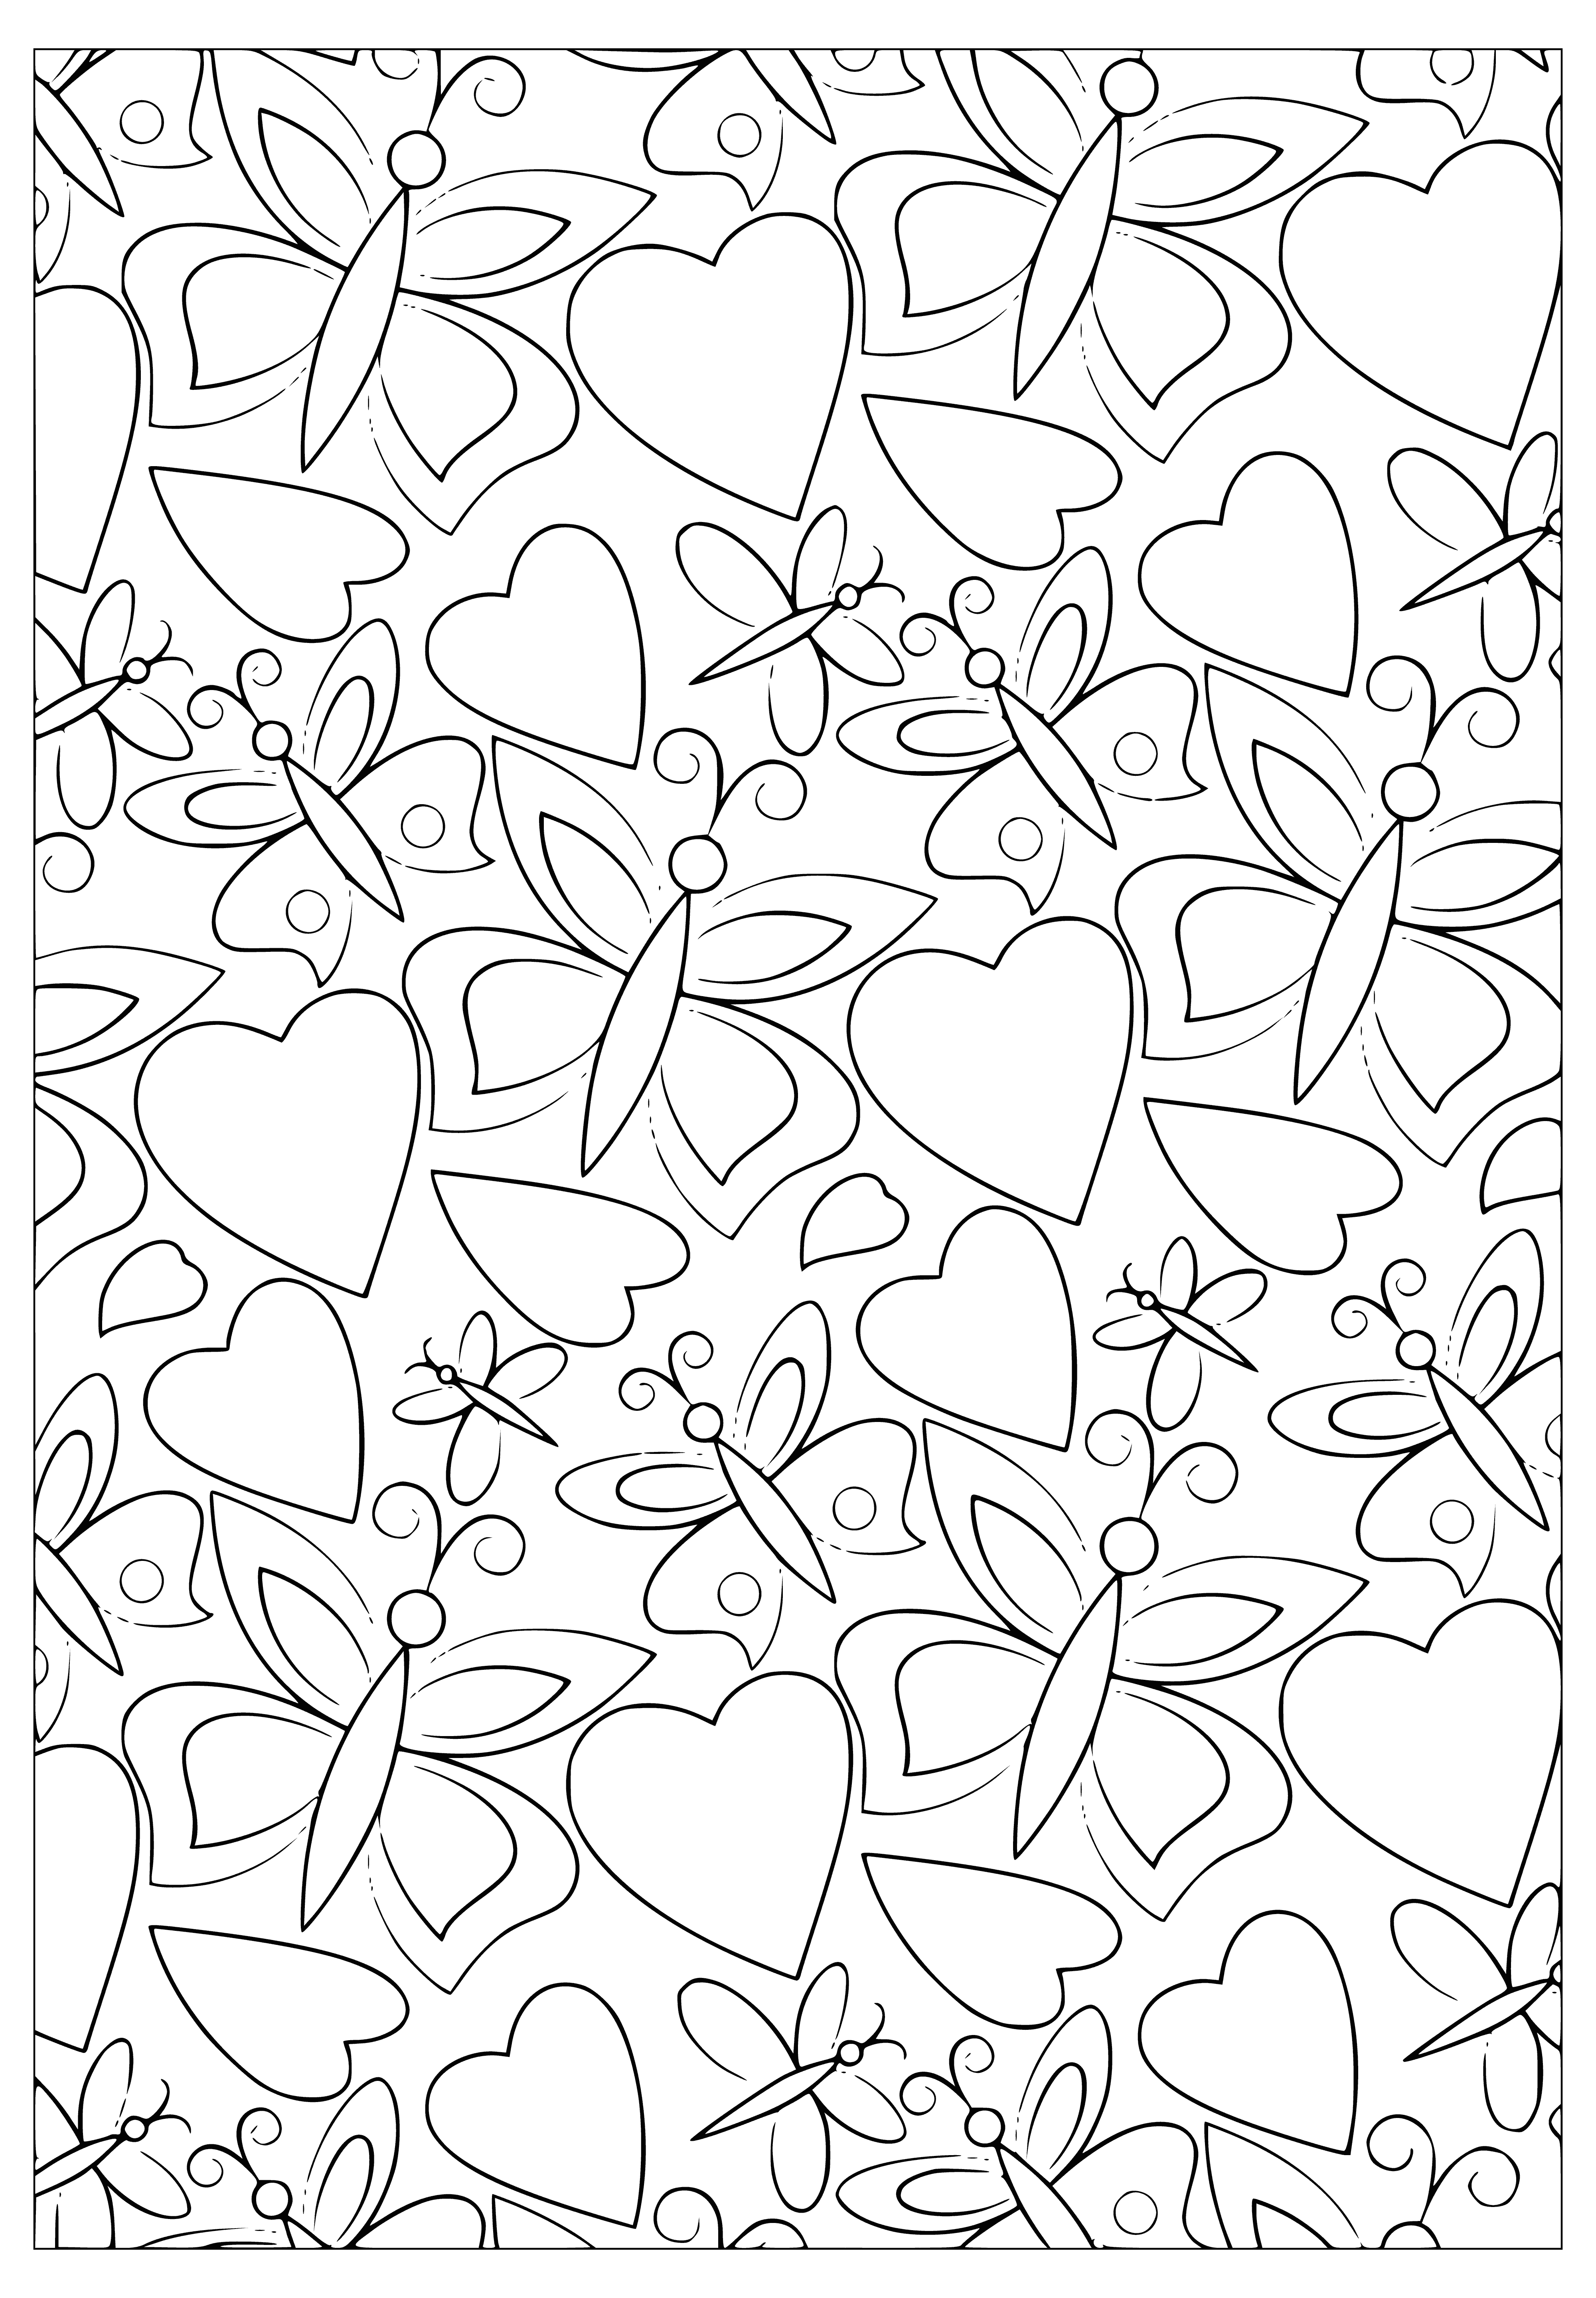 coloring page: #ValentinesDay